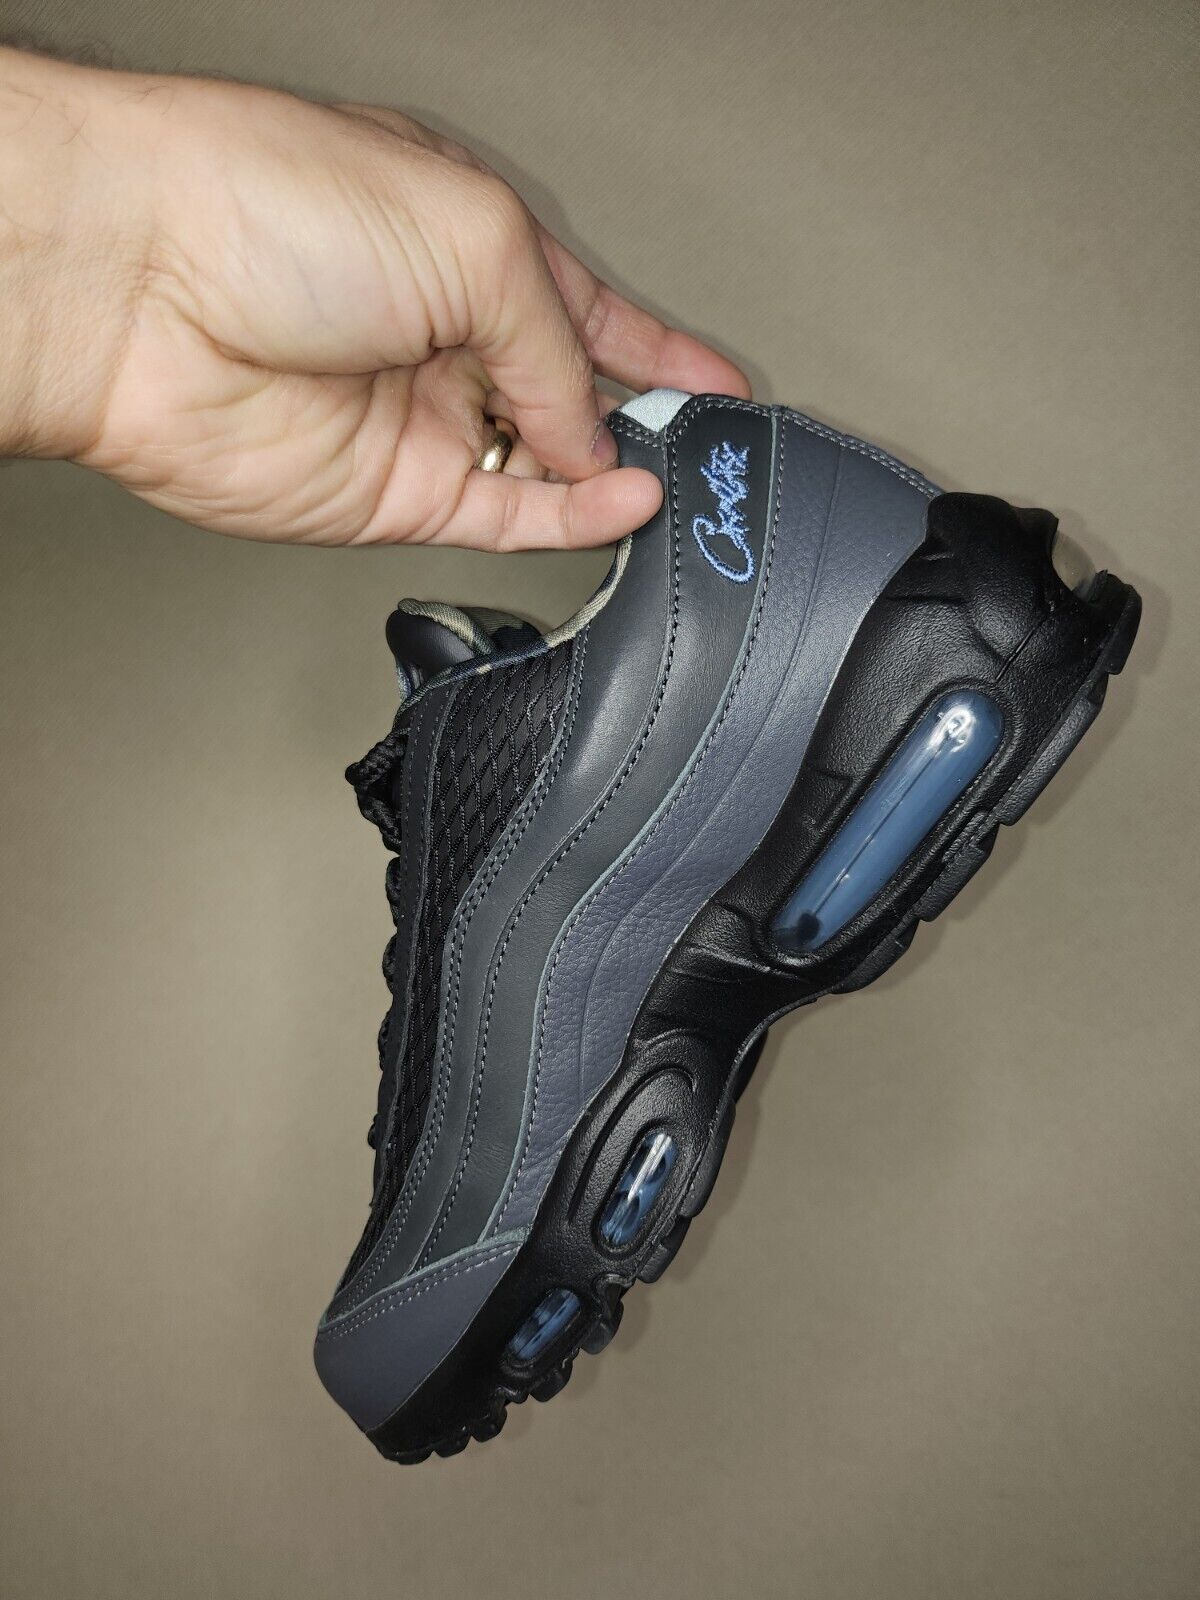 Size 7 - Nike Air Max 95 SP x Corteiz Low Rules the World - Aegean Storm